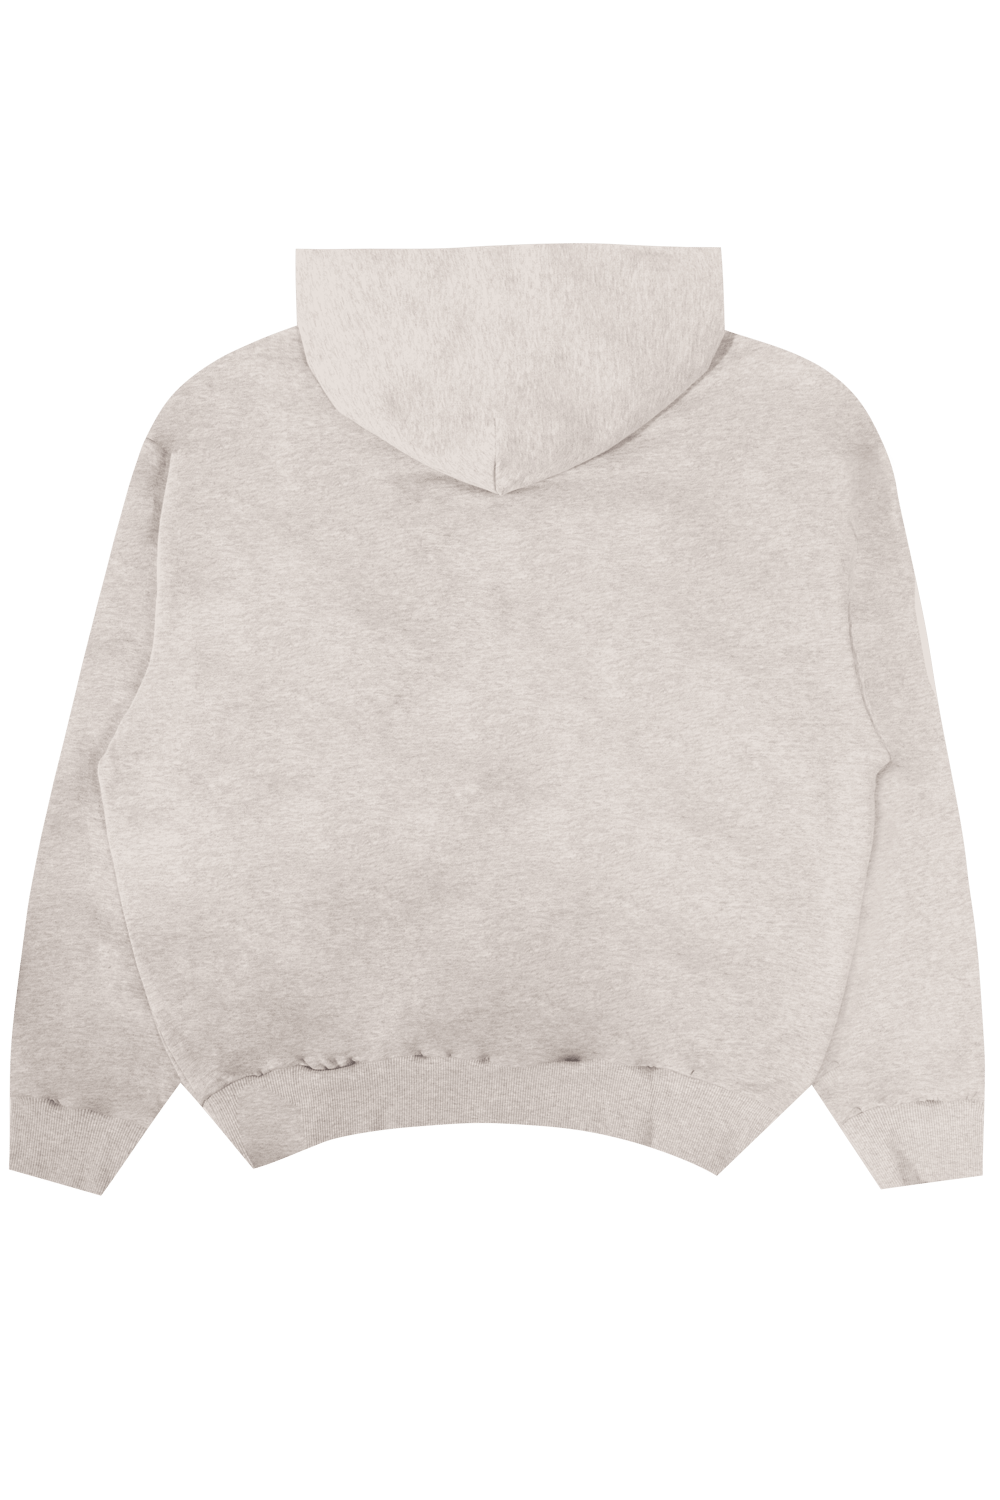 TRILLION JEANS GREY PULL OVER HOODIE 